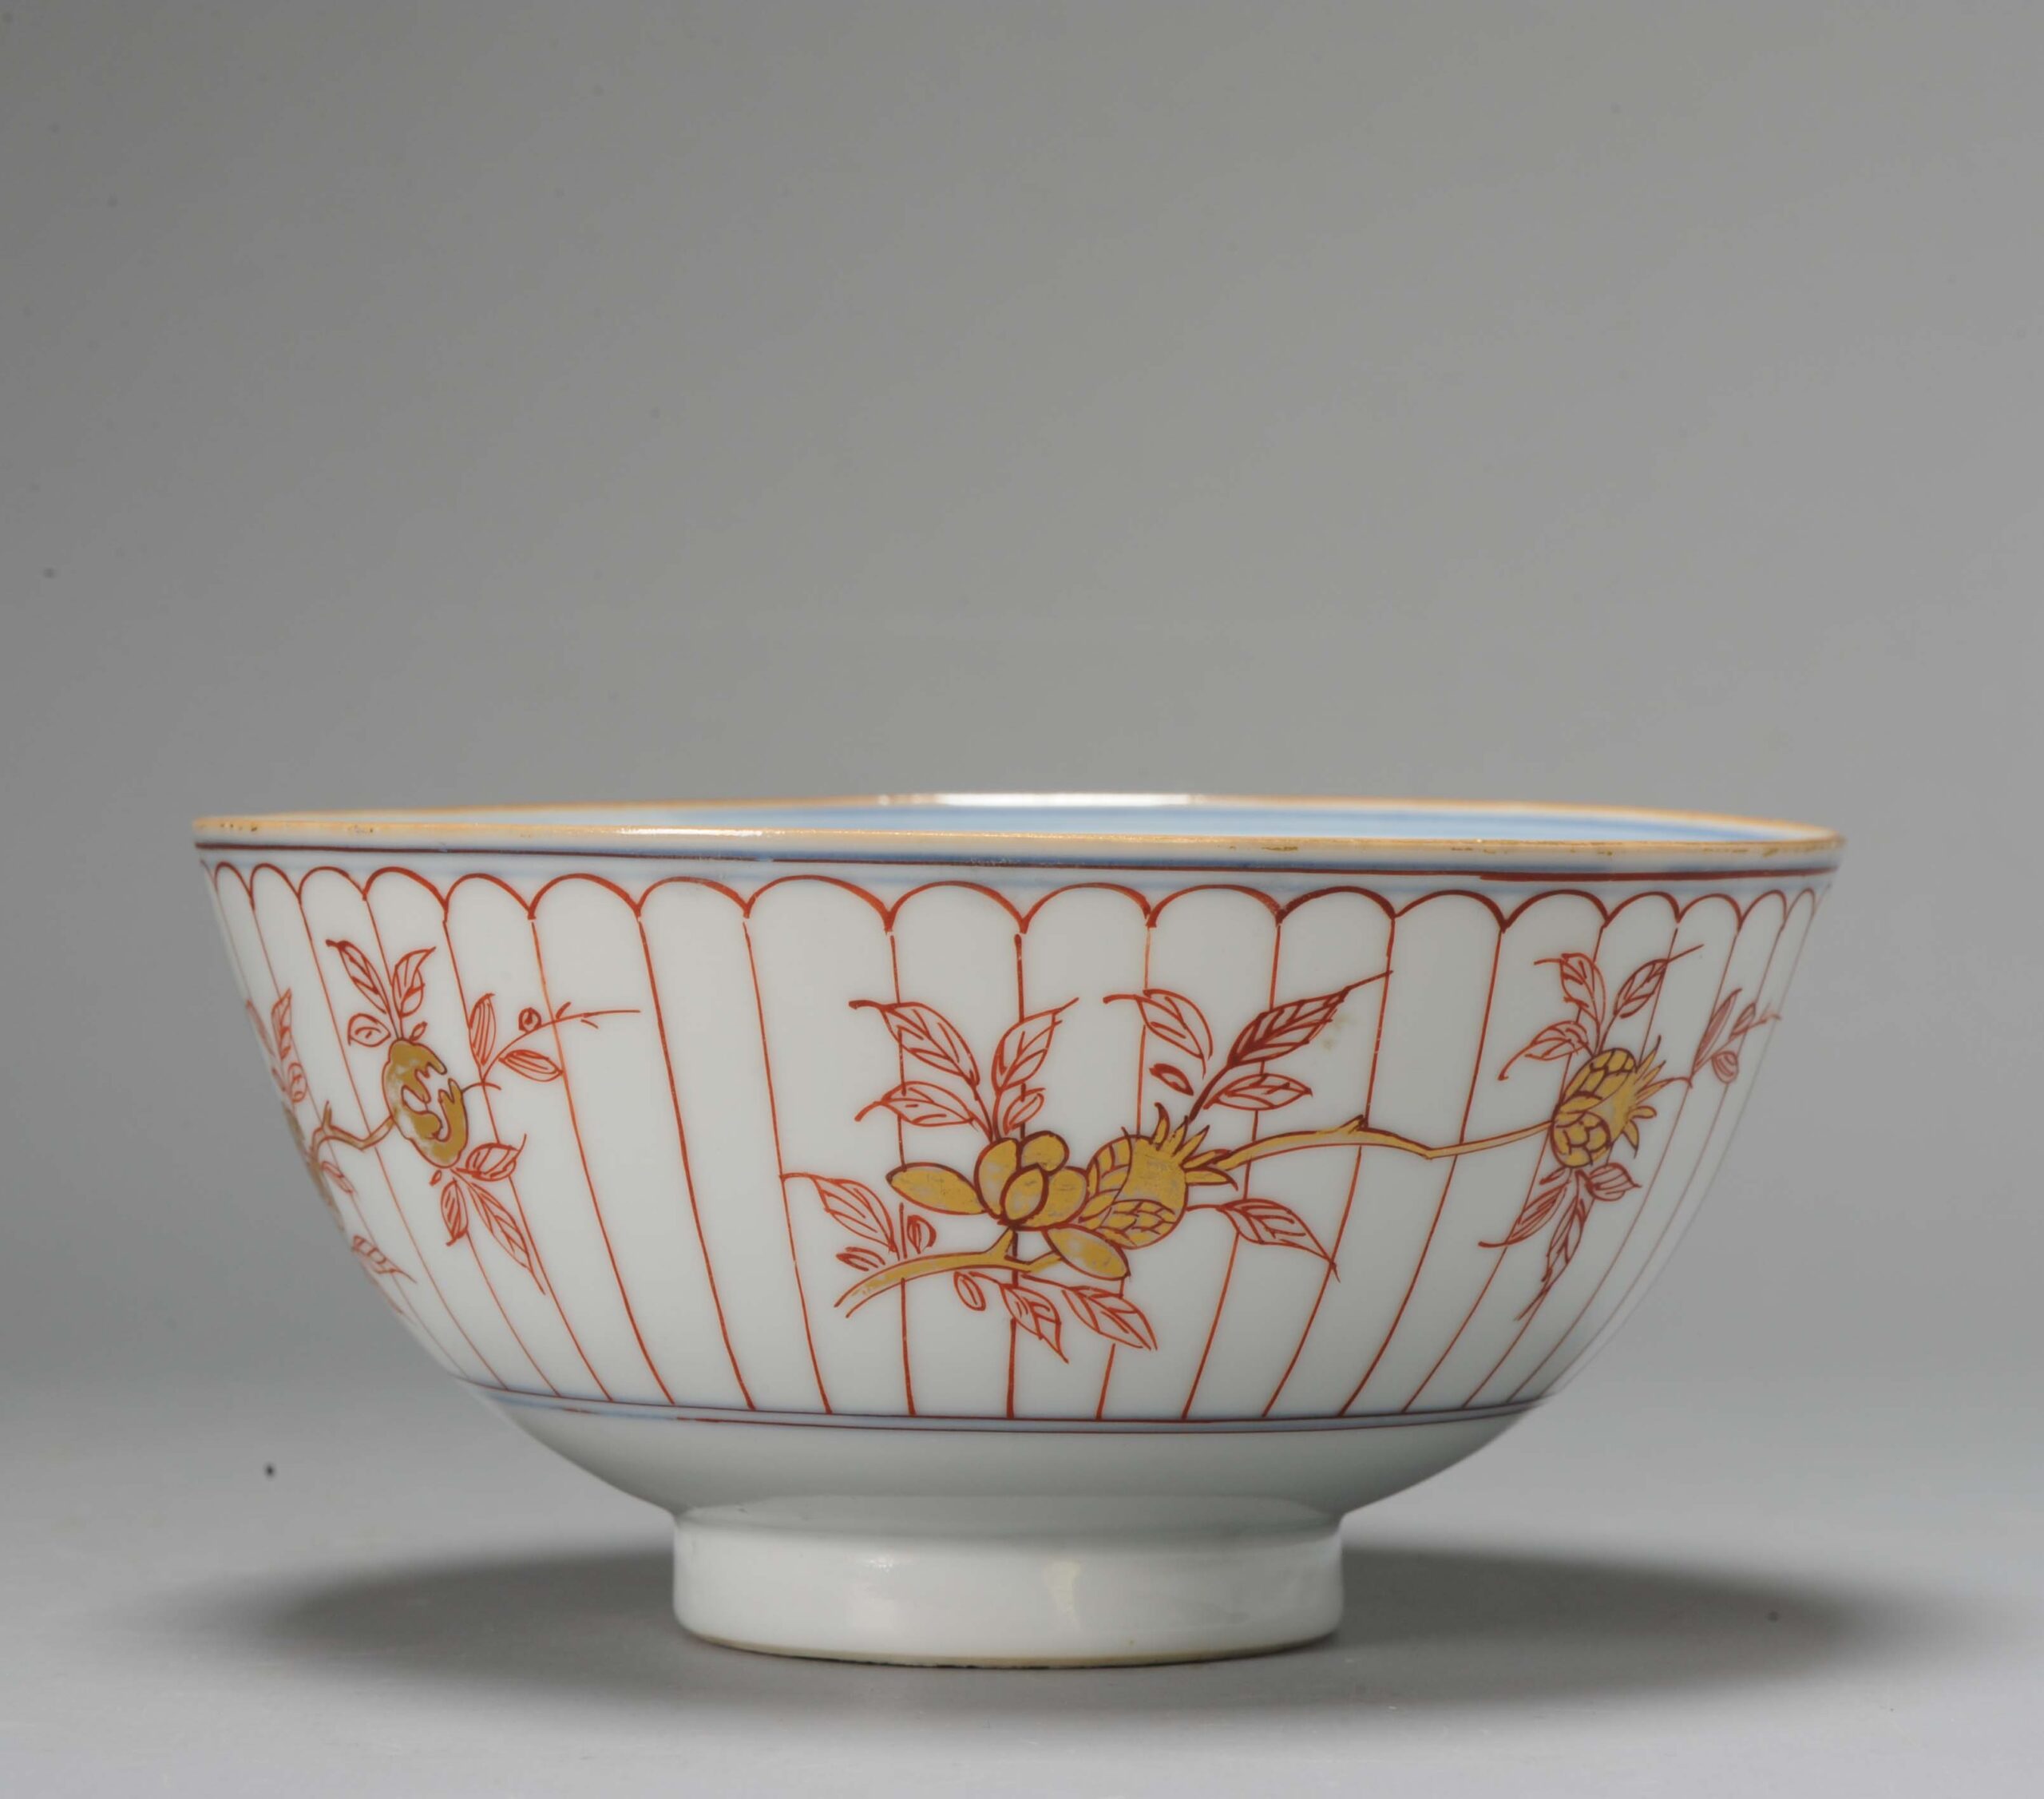 A Perfect Condition Chinese Porcelain Gold Imari Bowl Kangxi Period Floral